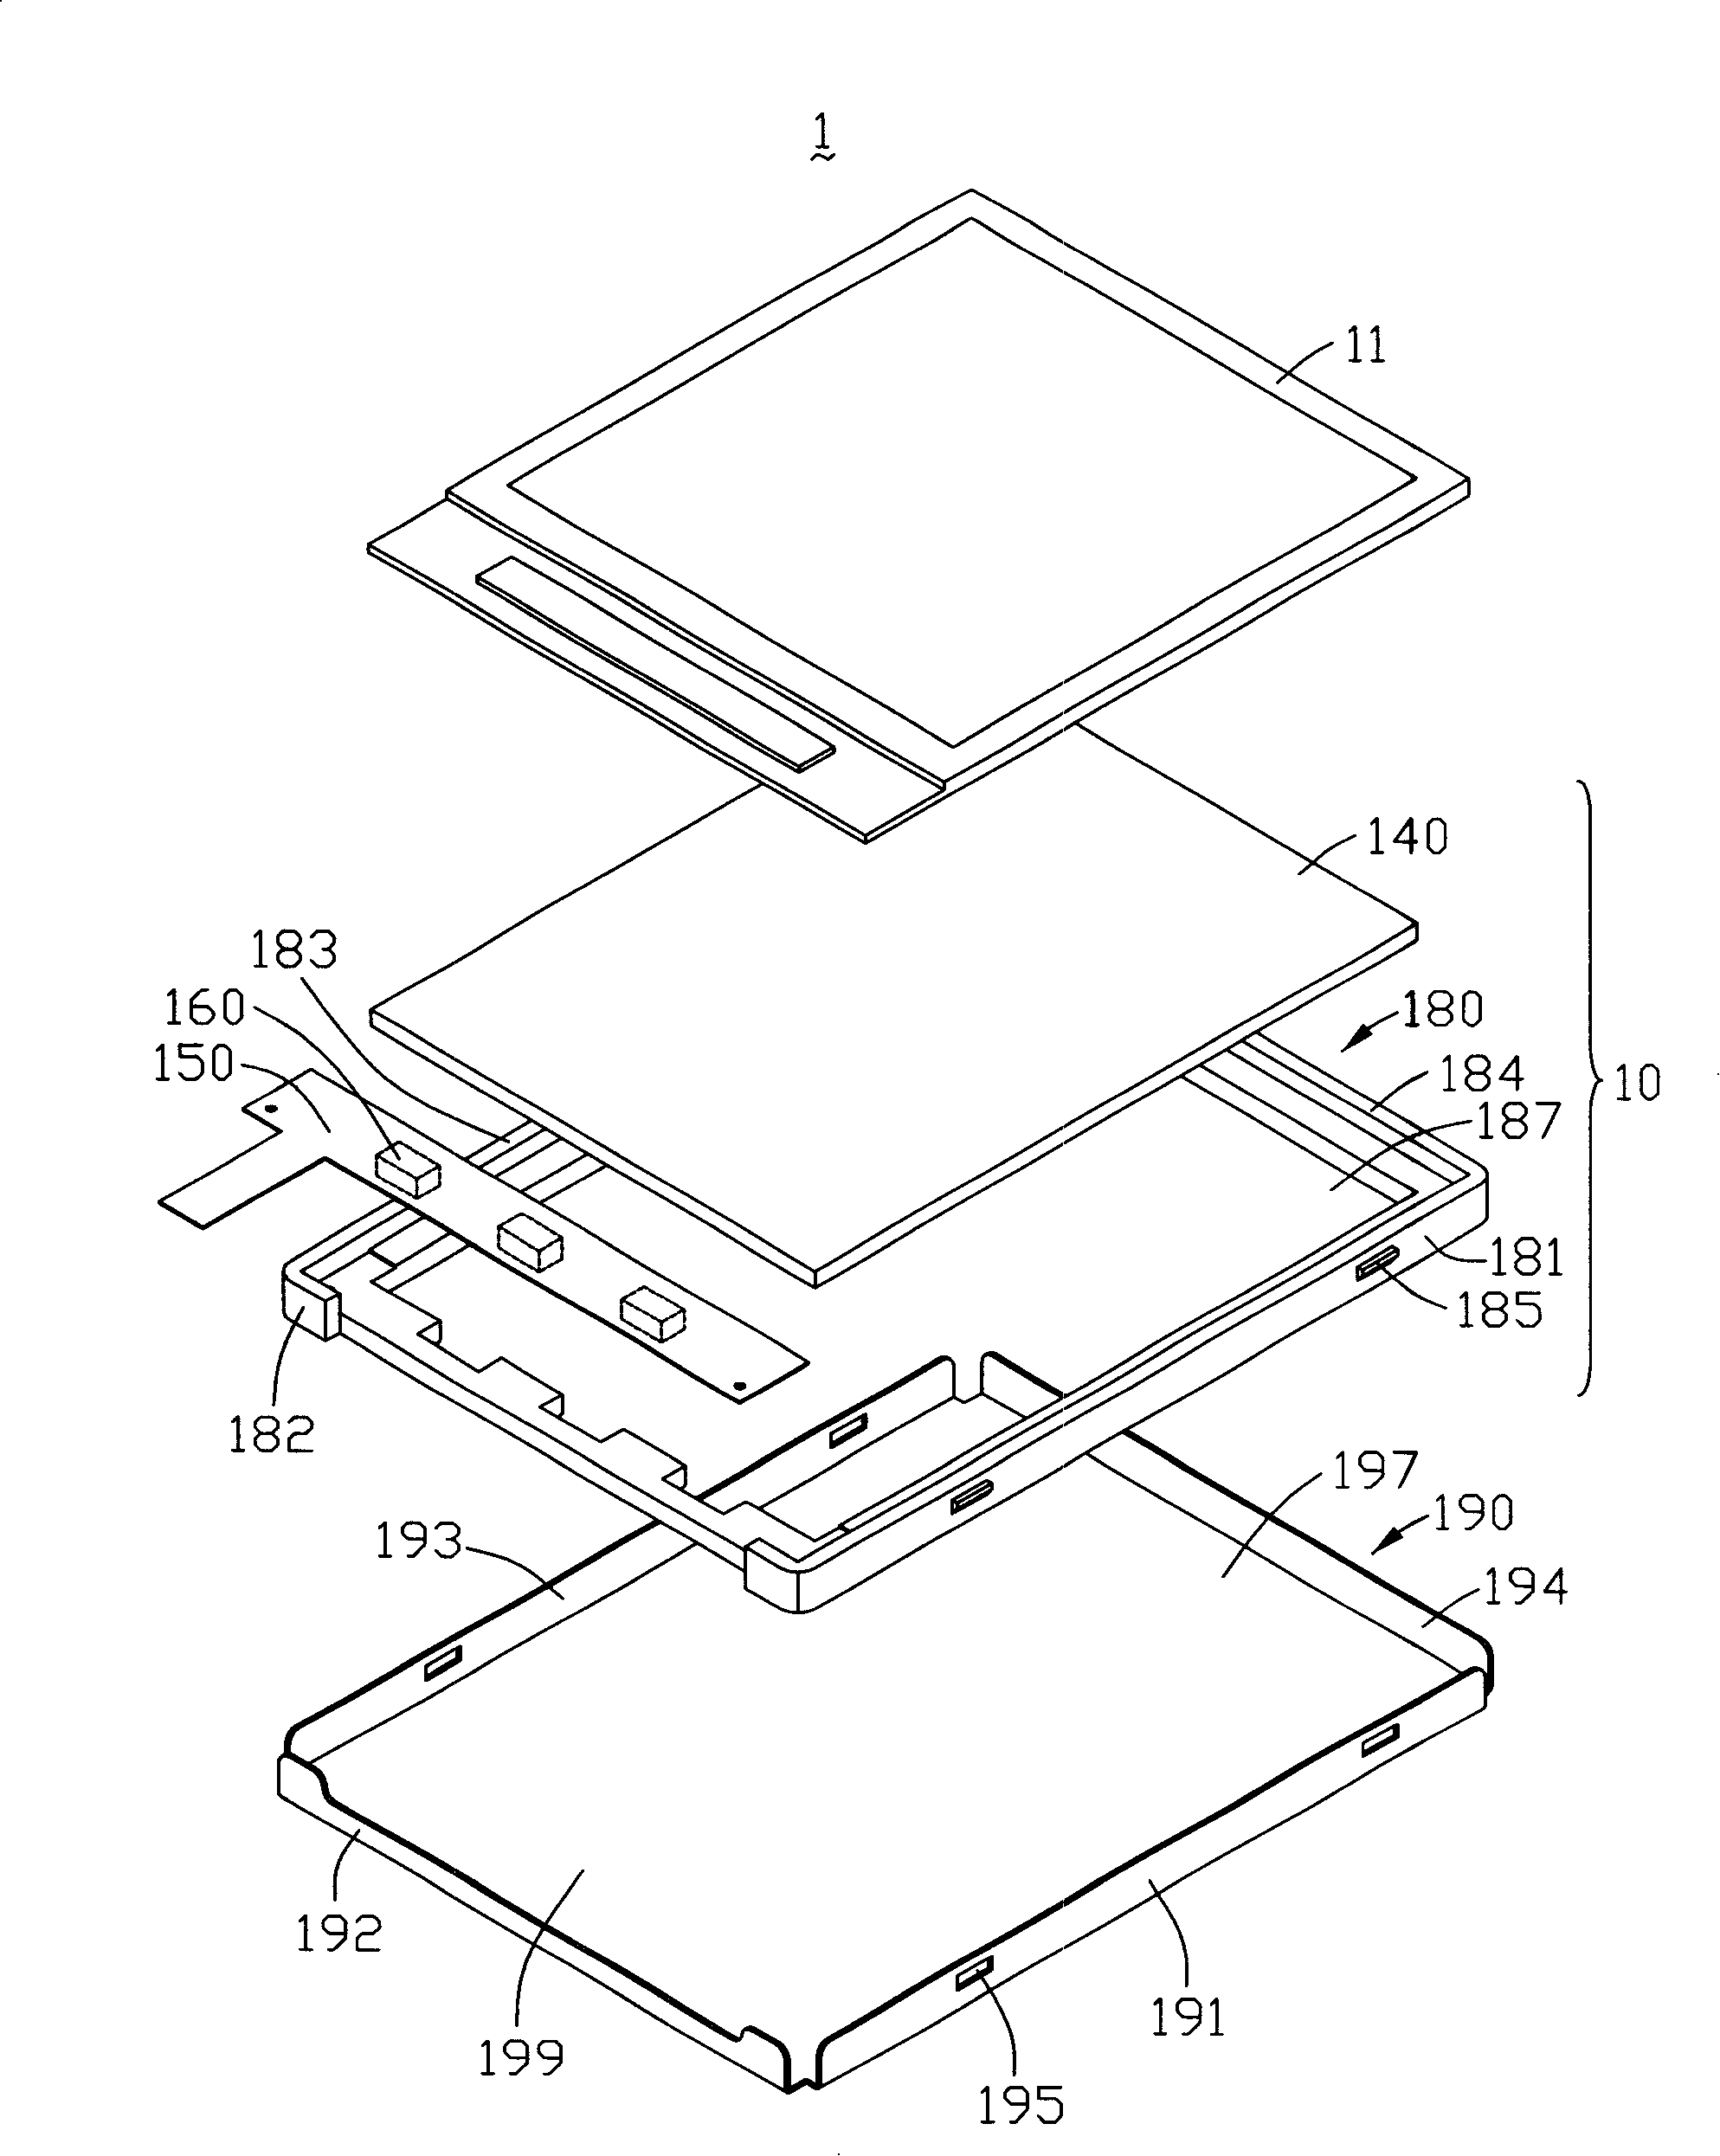 LCD device